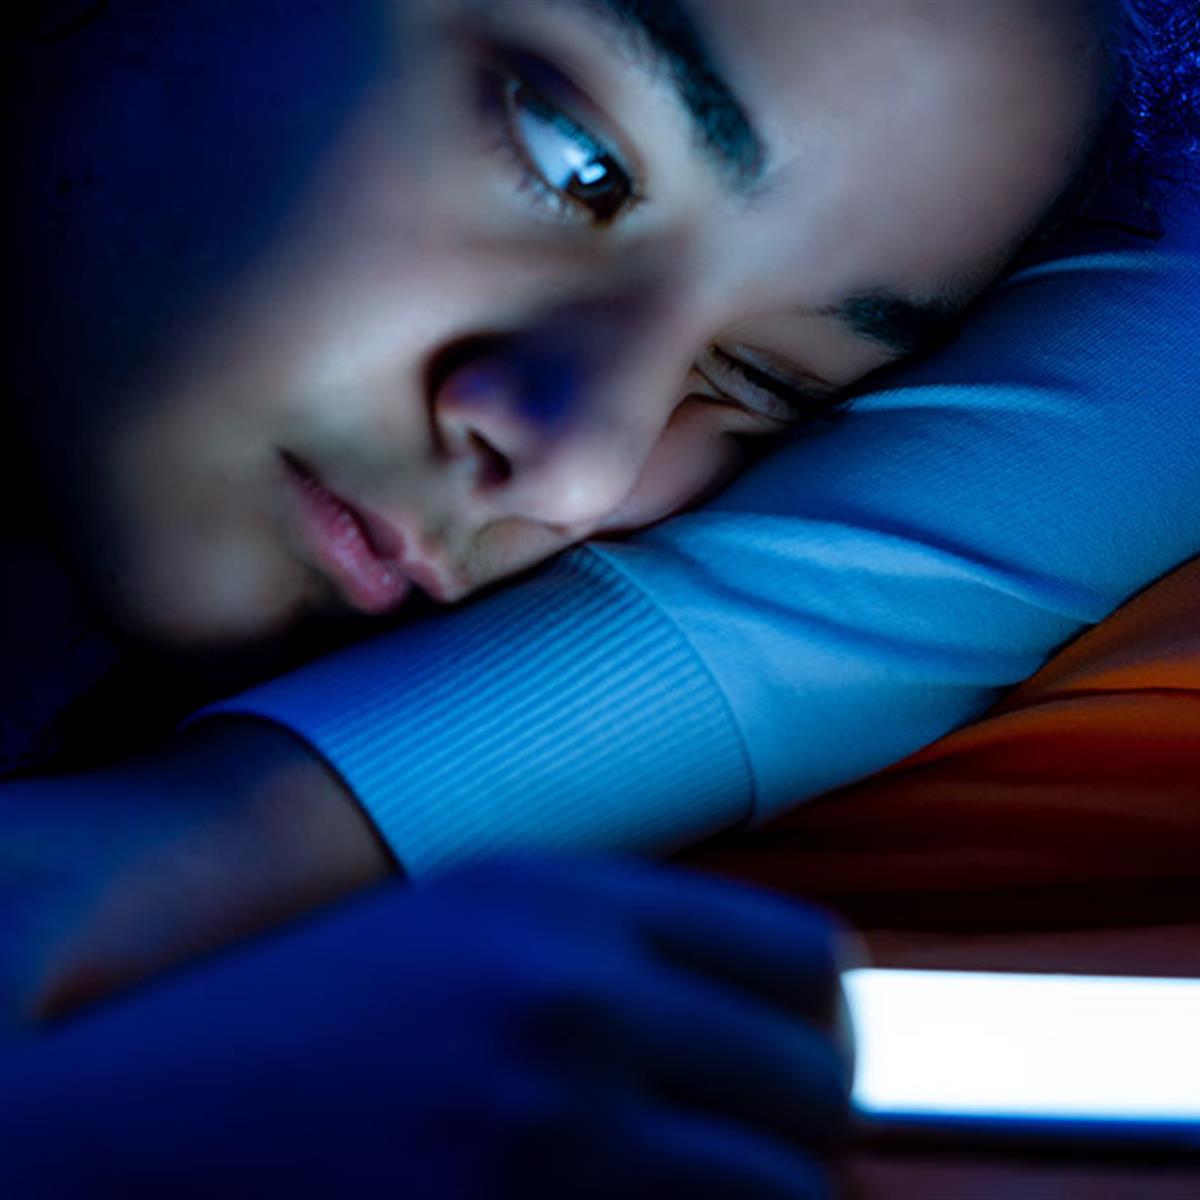 Silleping Xxx Full Videos - My teen is having more trouble falling asleep at night lately. How can I  help? - HealthyChildren.org